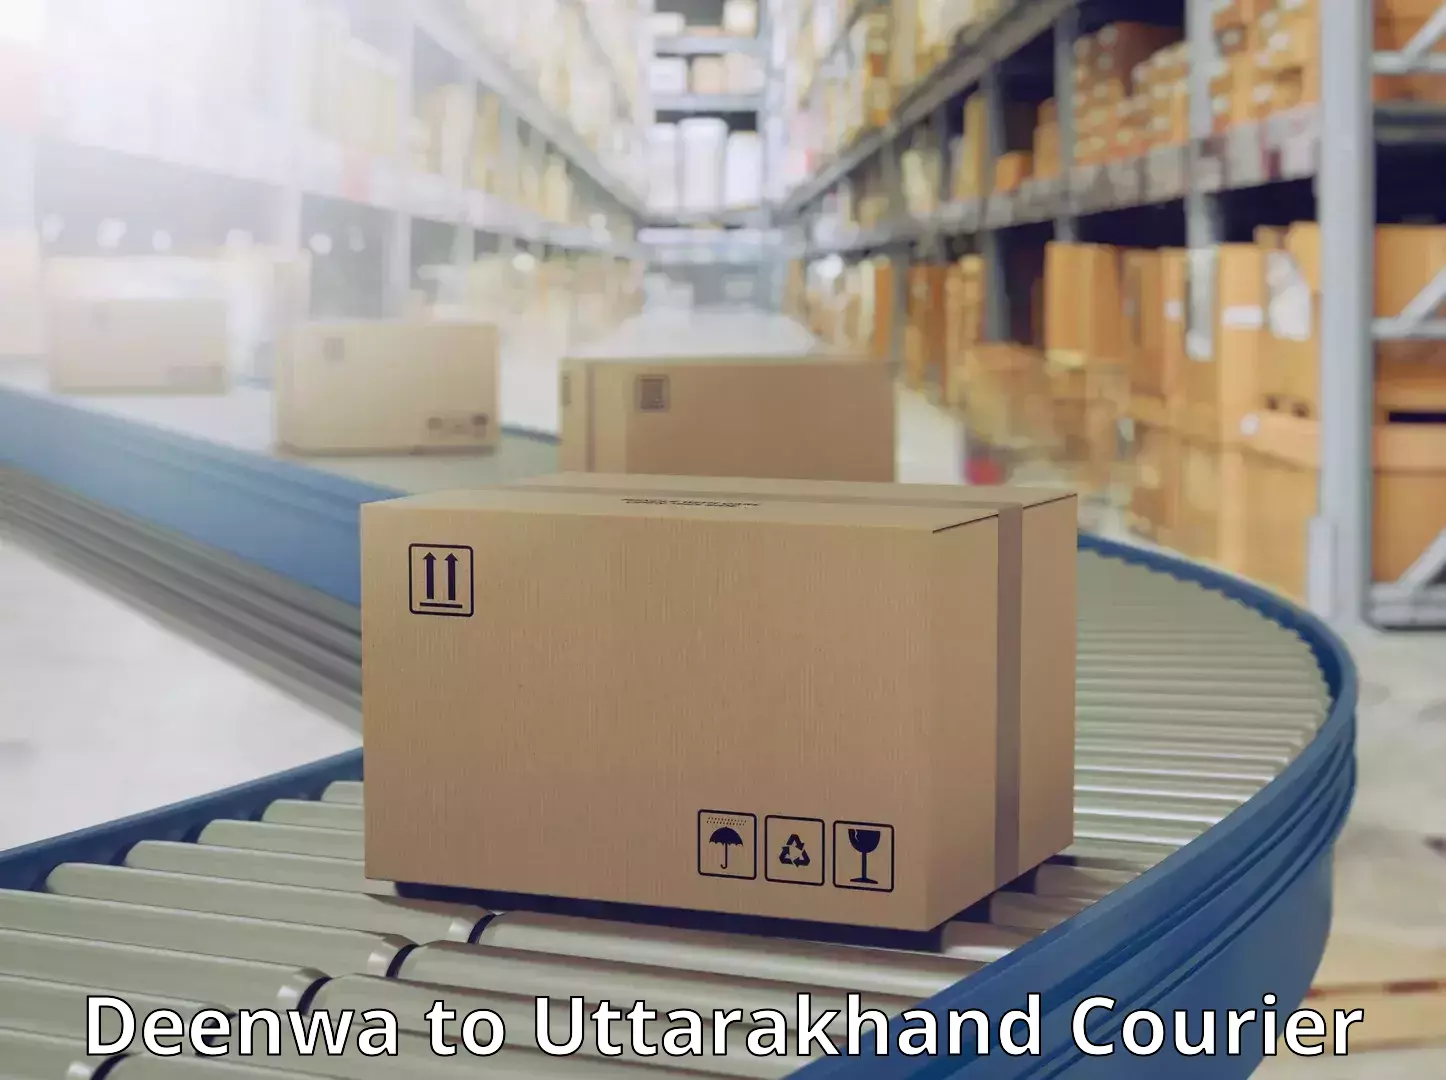 Efficient package consolidation Deenwa to Uttarakhand